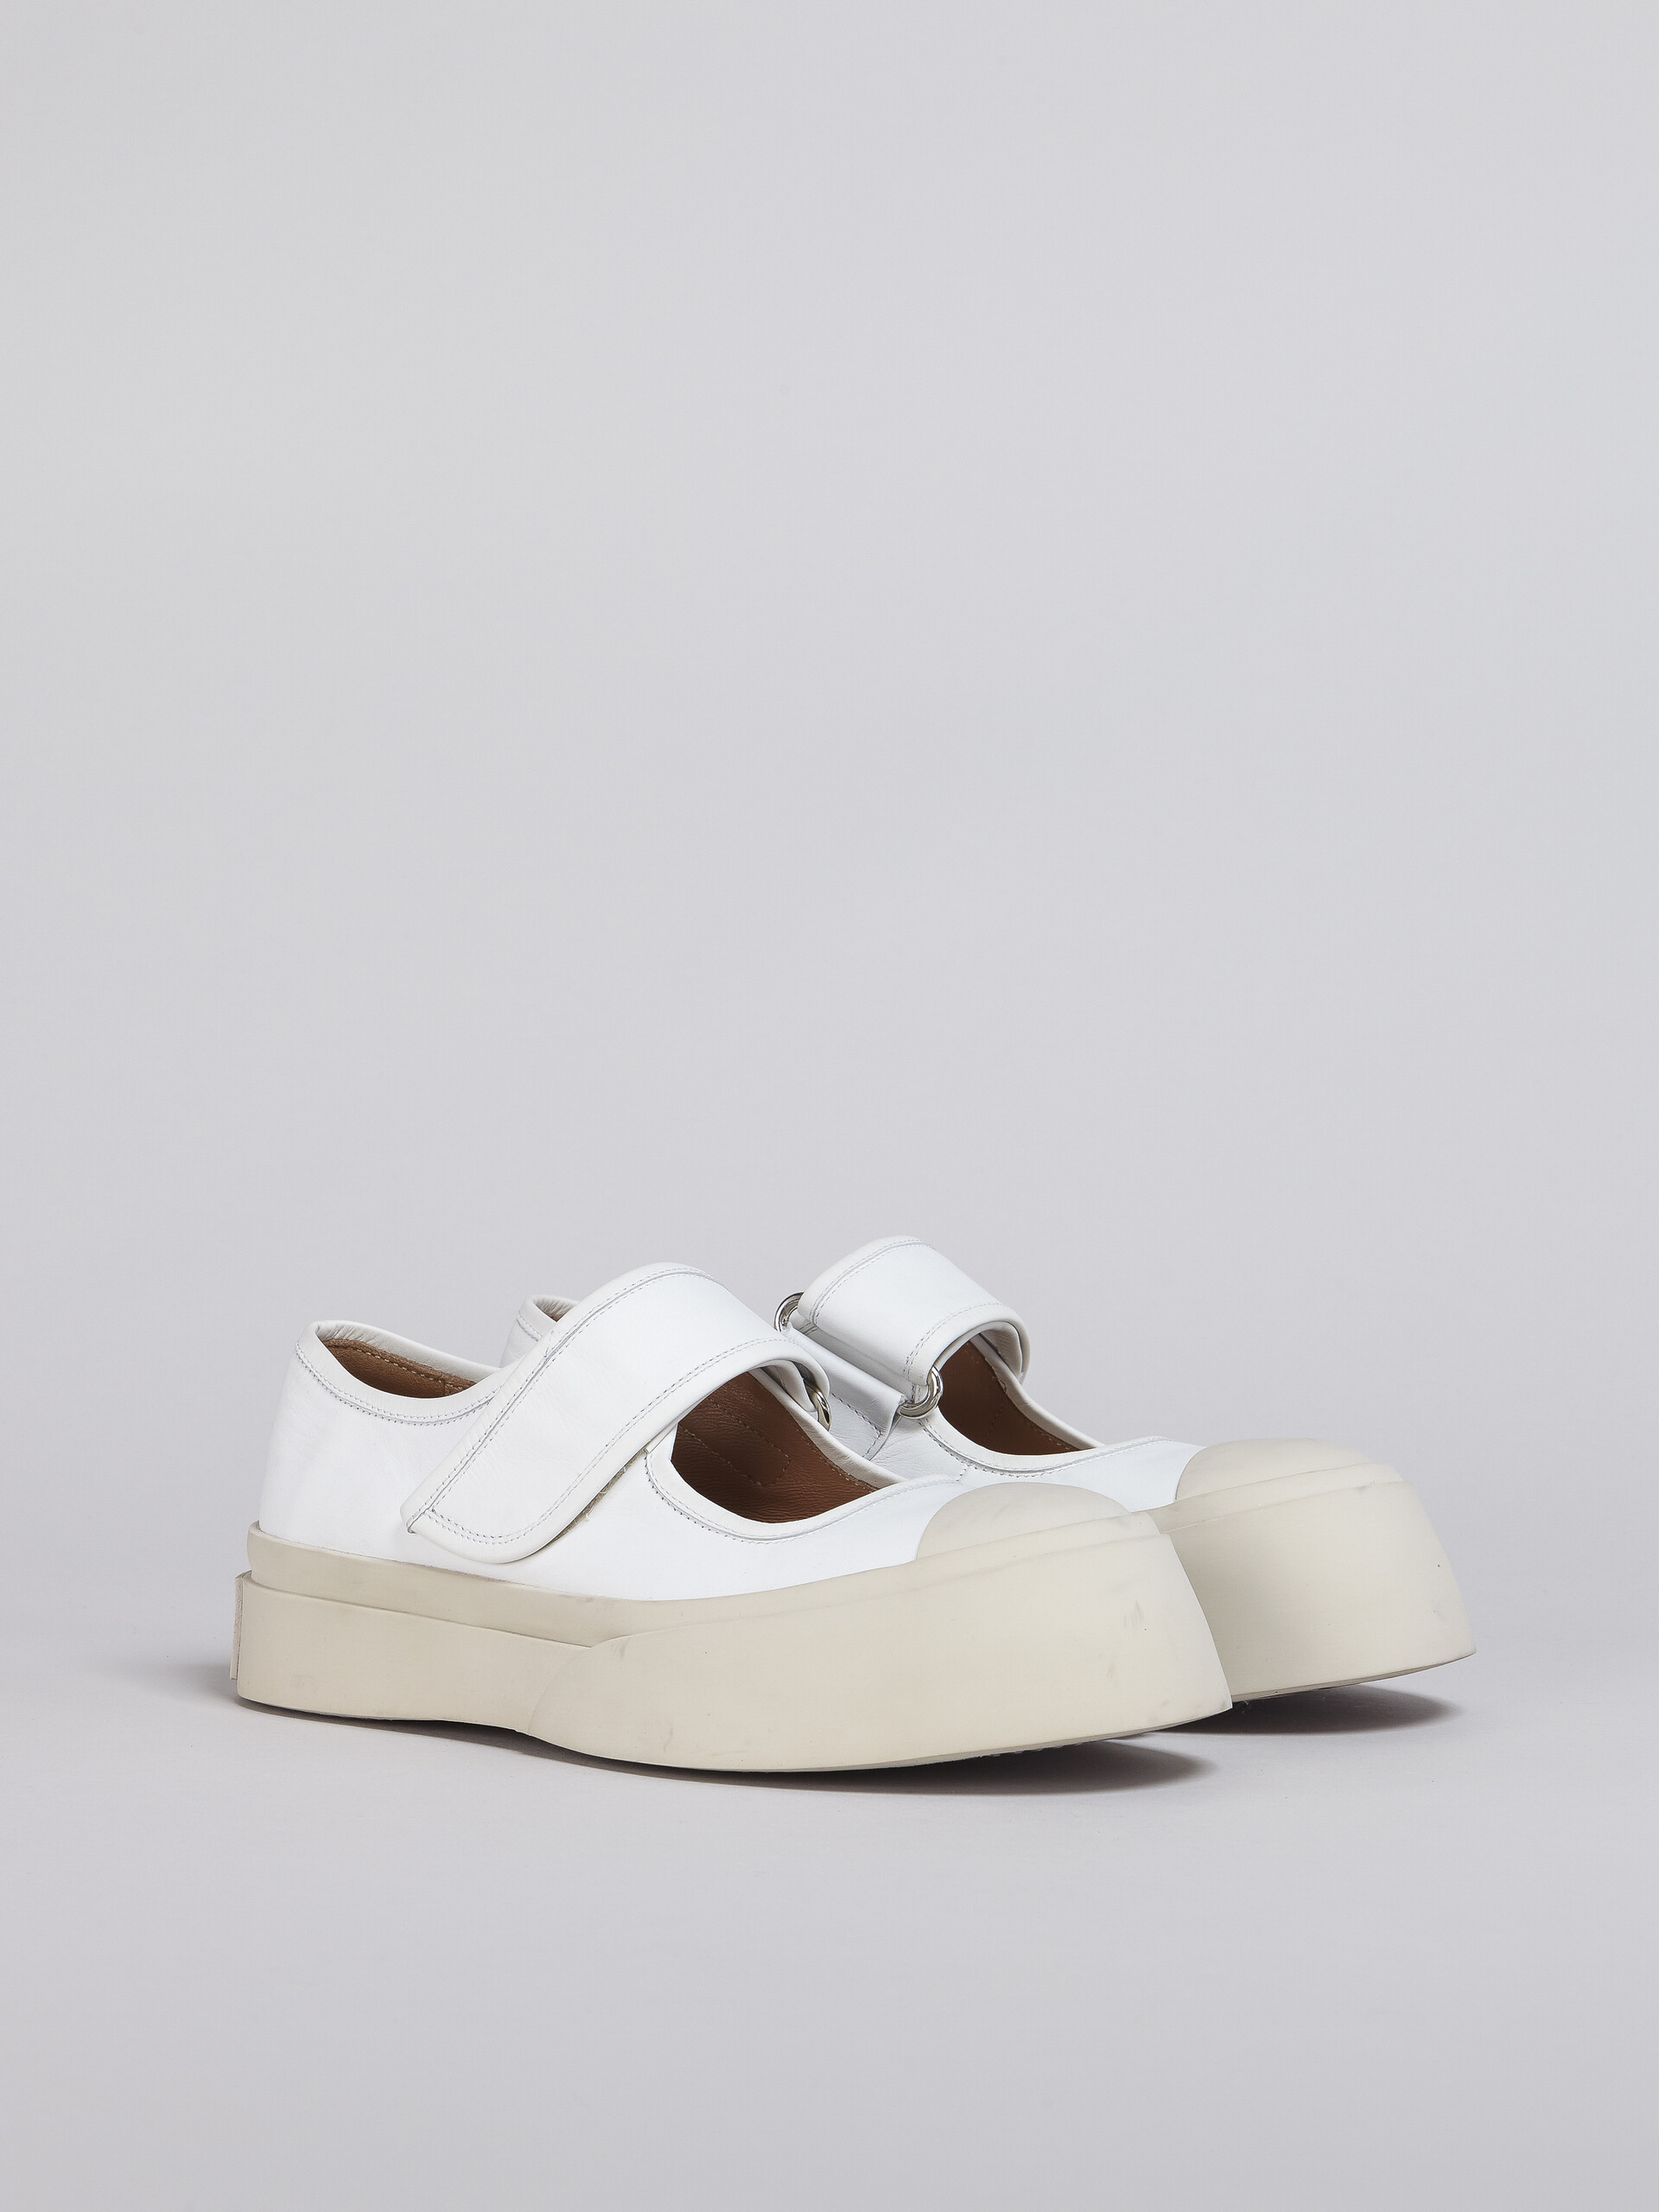 White leather Mary Jane sneaker - Sneakers - Image 2